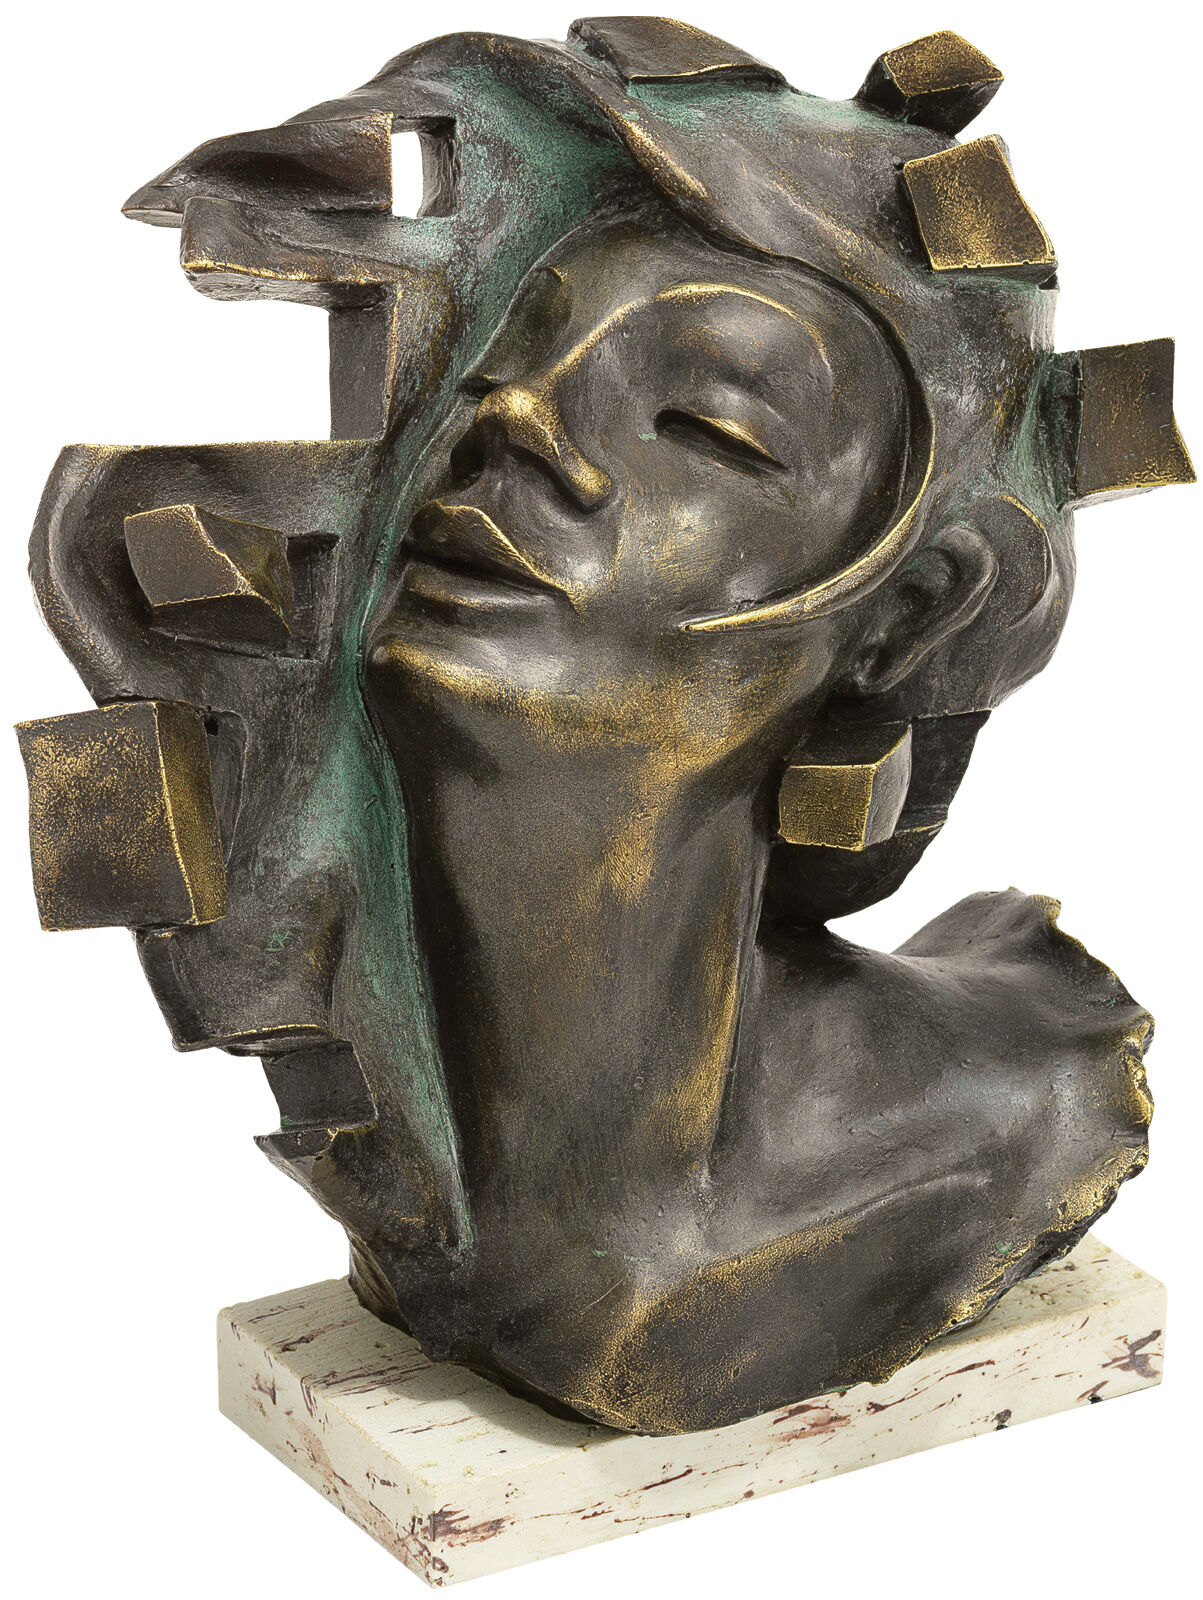 Sculpture "Le Souffle", bronzed artificial marble by Andreas Gomez